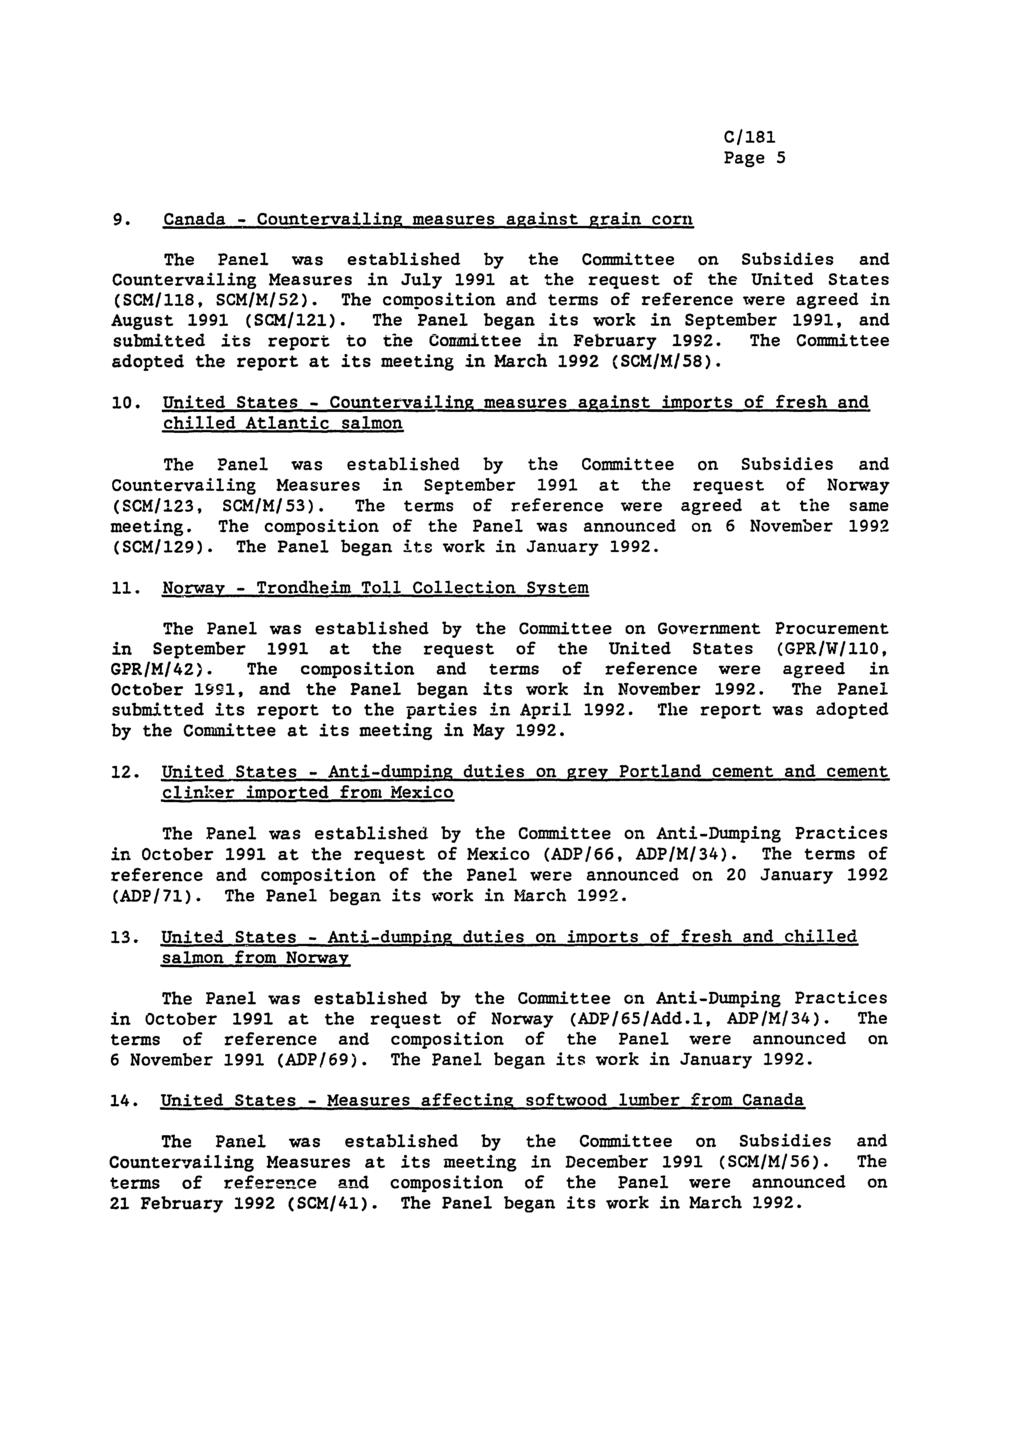 Page 5 9. Canada - Countervailing measures against grain corn Countervailing Measures in July 1991 at the request of the United States (SCM/118, SCM/M/52).